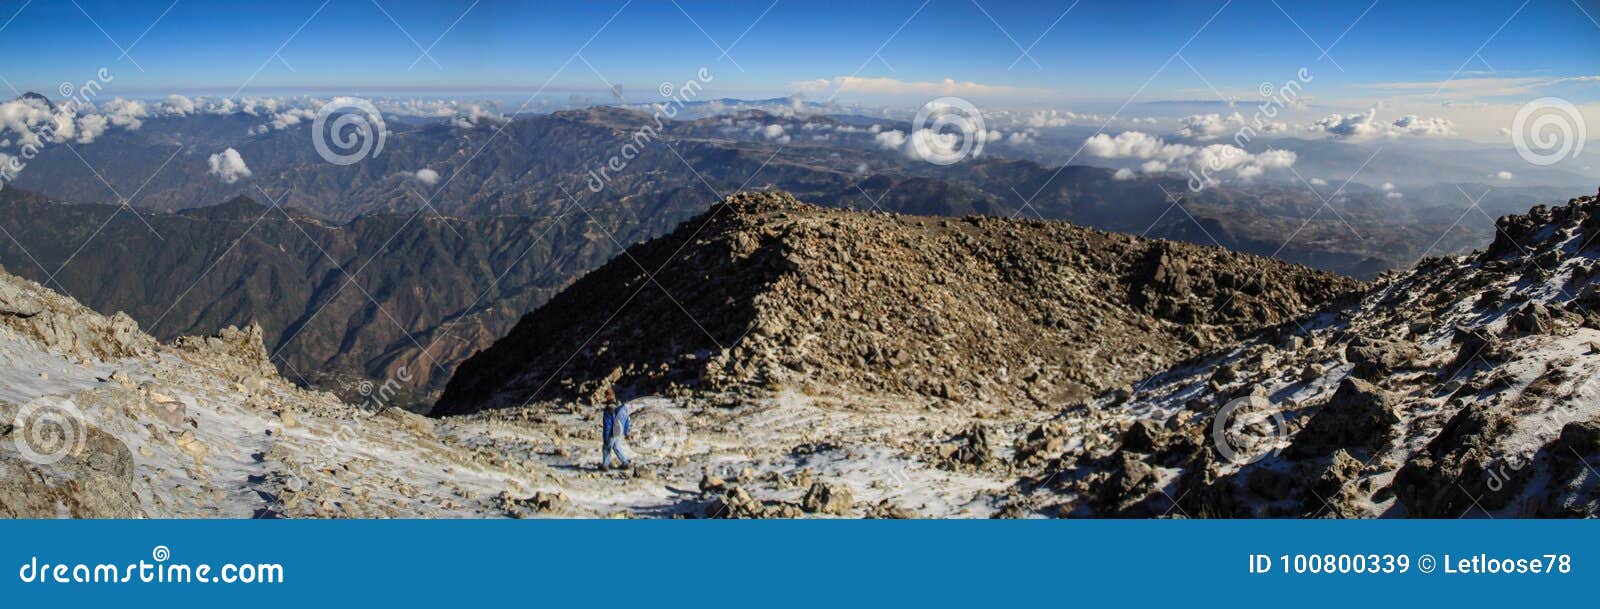 panoramic view from the tajumulco summit on the sierra madre, san marcos, altiplano, guatemala